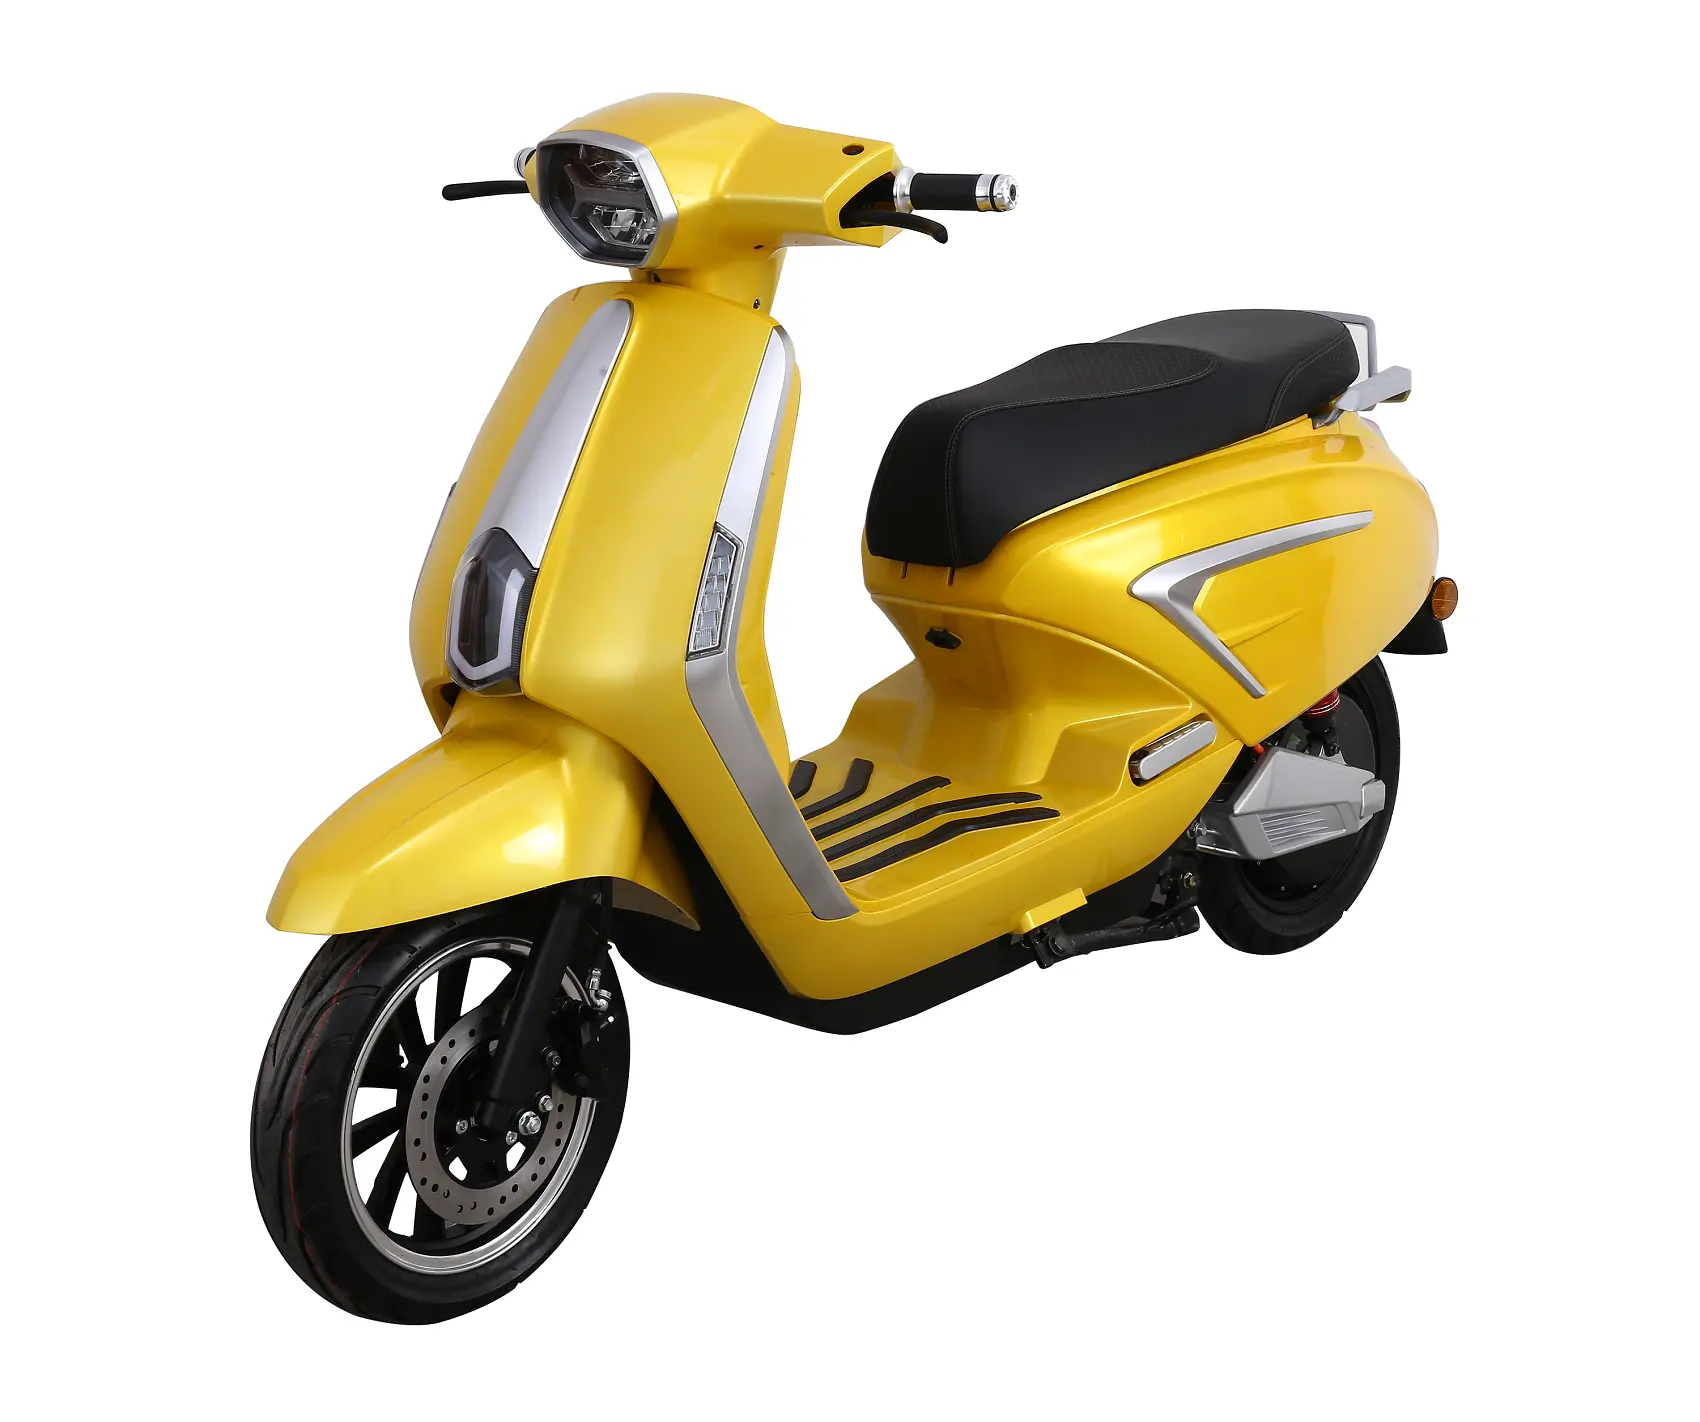 72 volt 3000w moto hub motor electric motorcycle electrica scooter